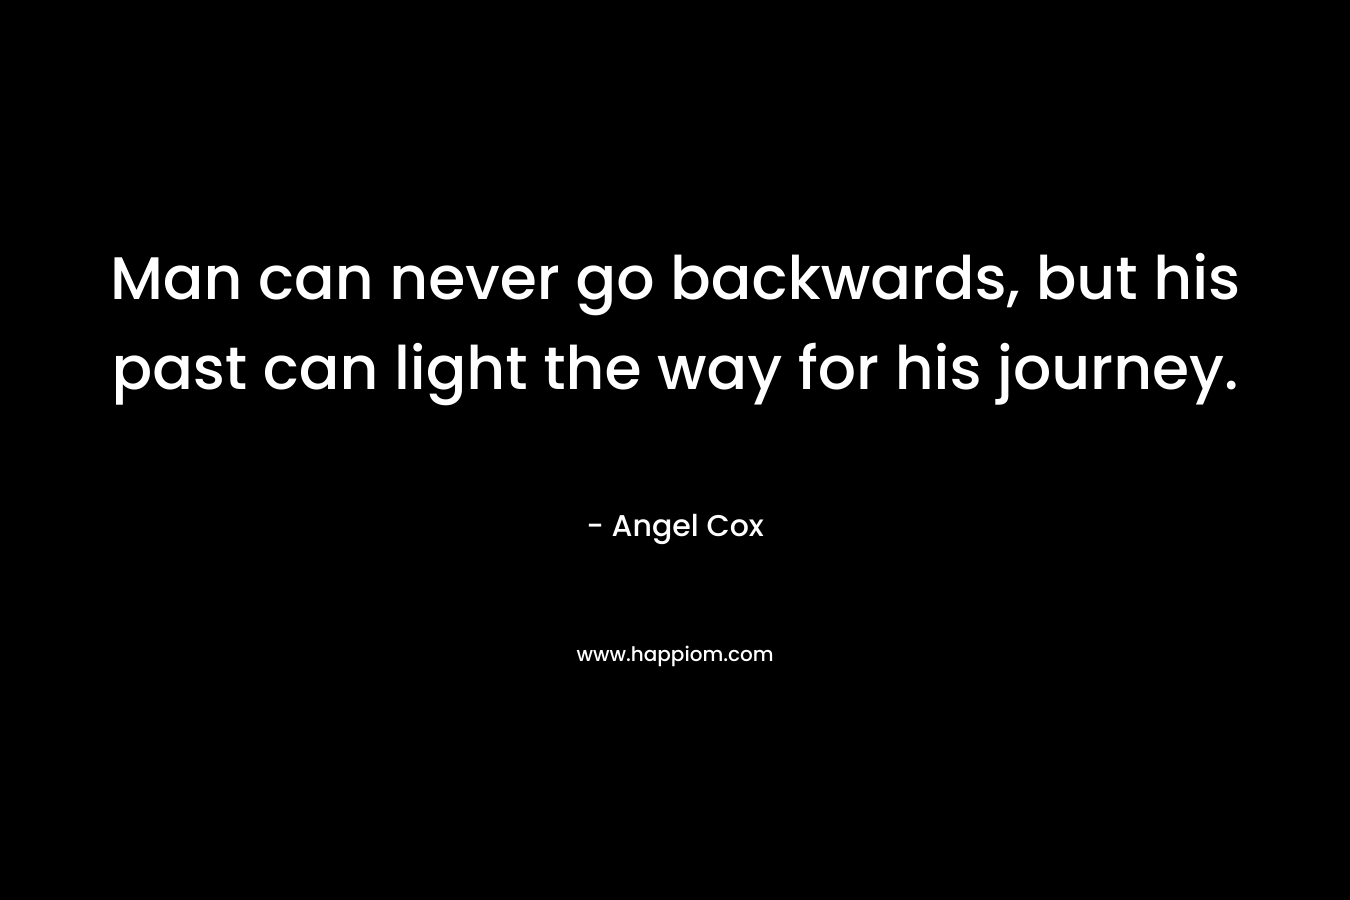 Man can never go backwards, but his past can light the way for his journey.